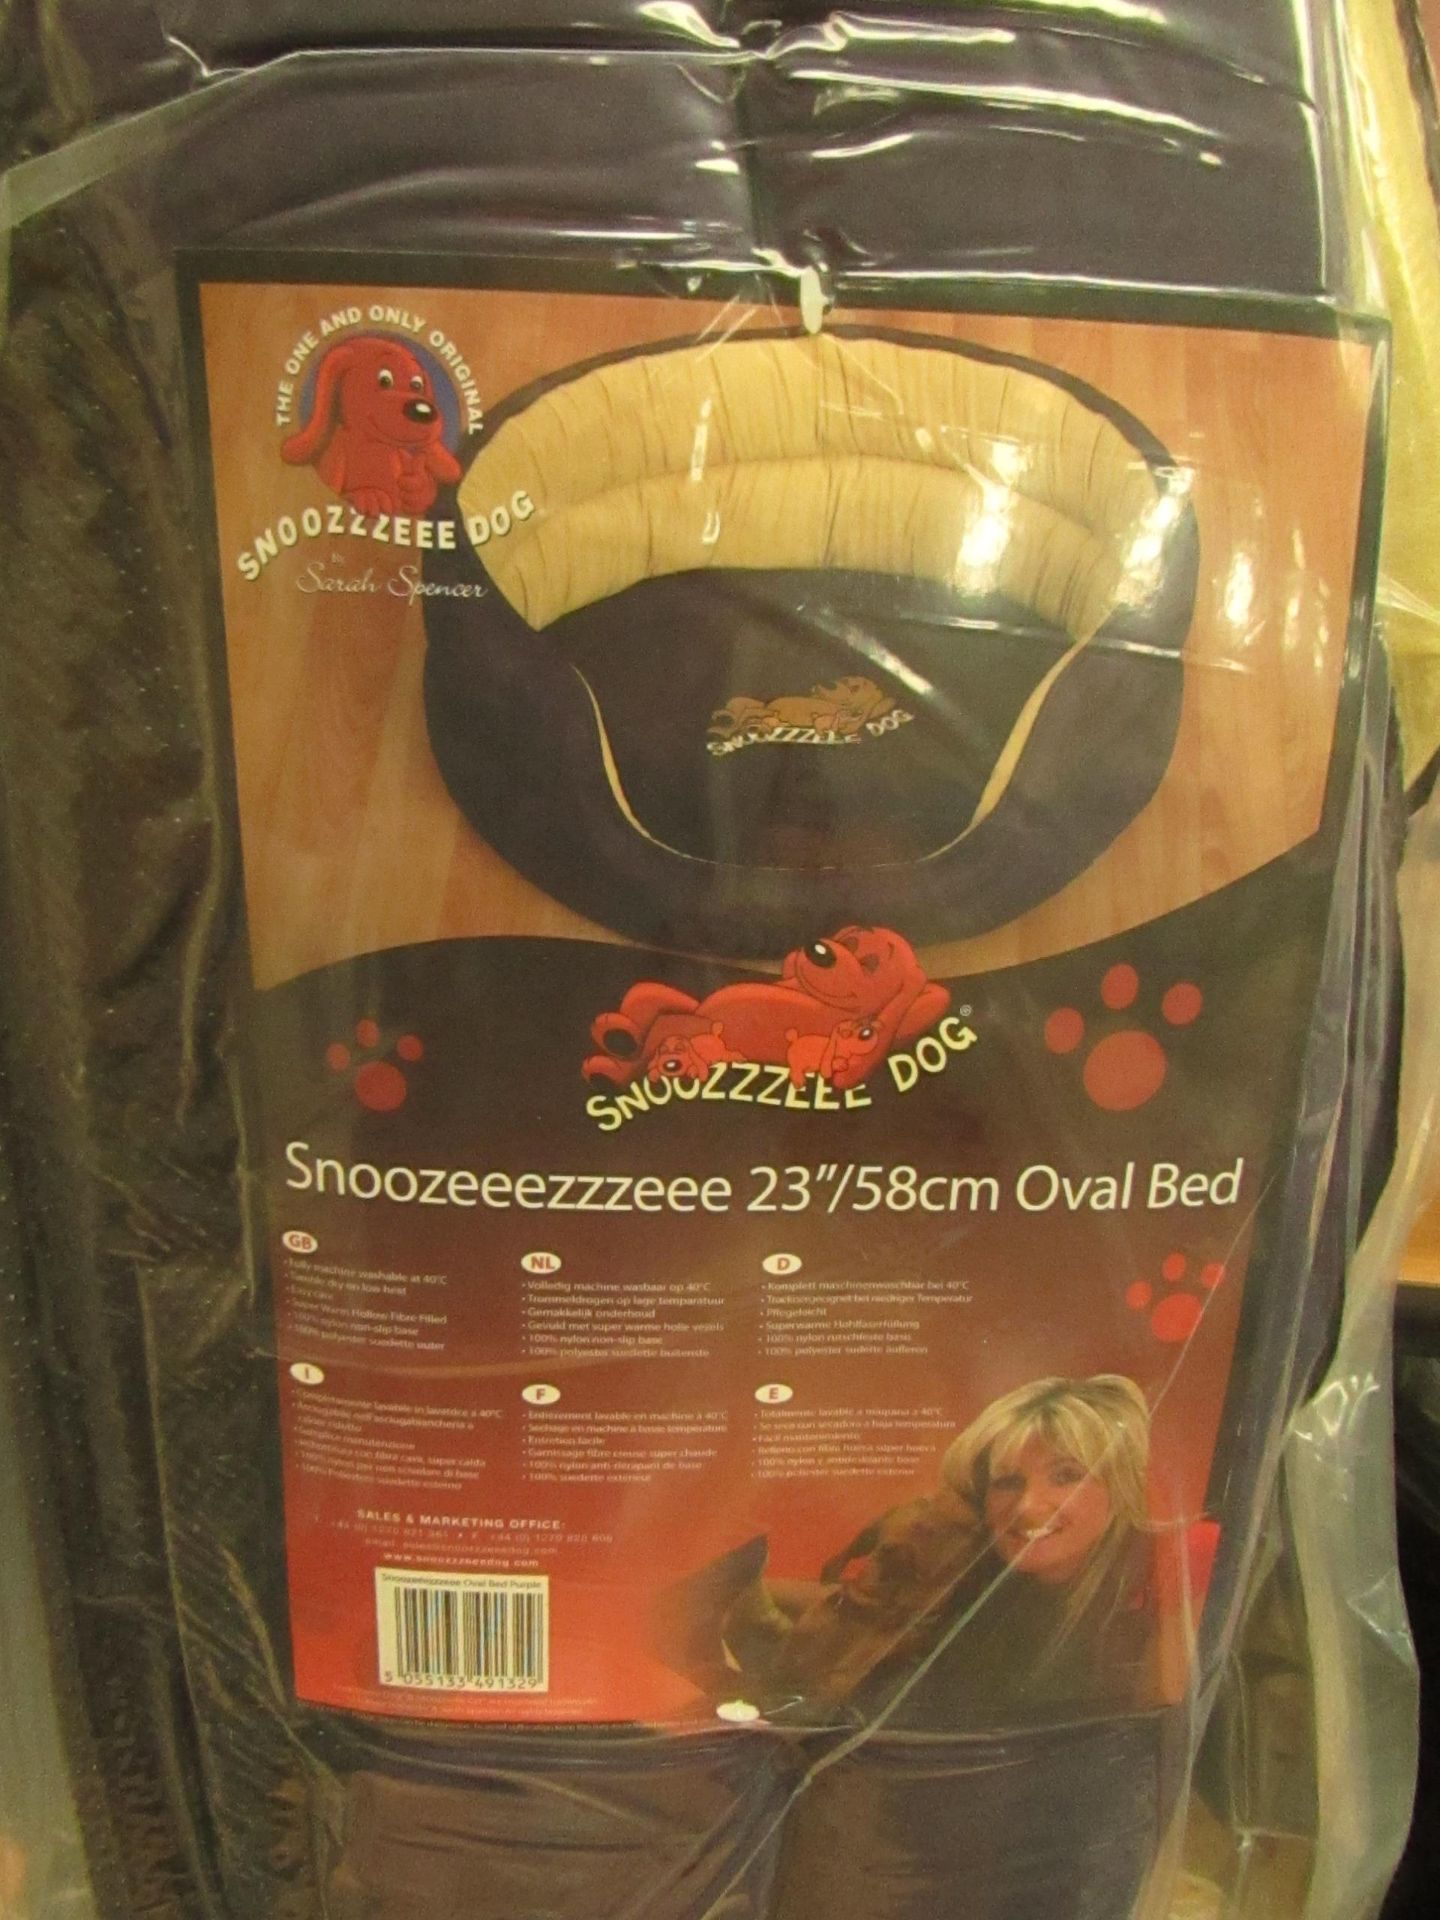 Snoozzzeee Dog - Purple Oval Dog Bed - 23" - New & Packaged.